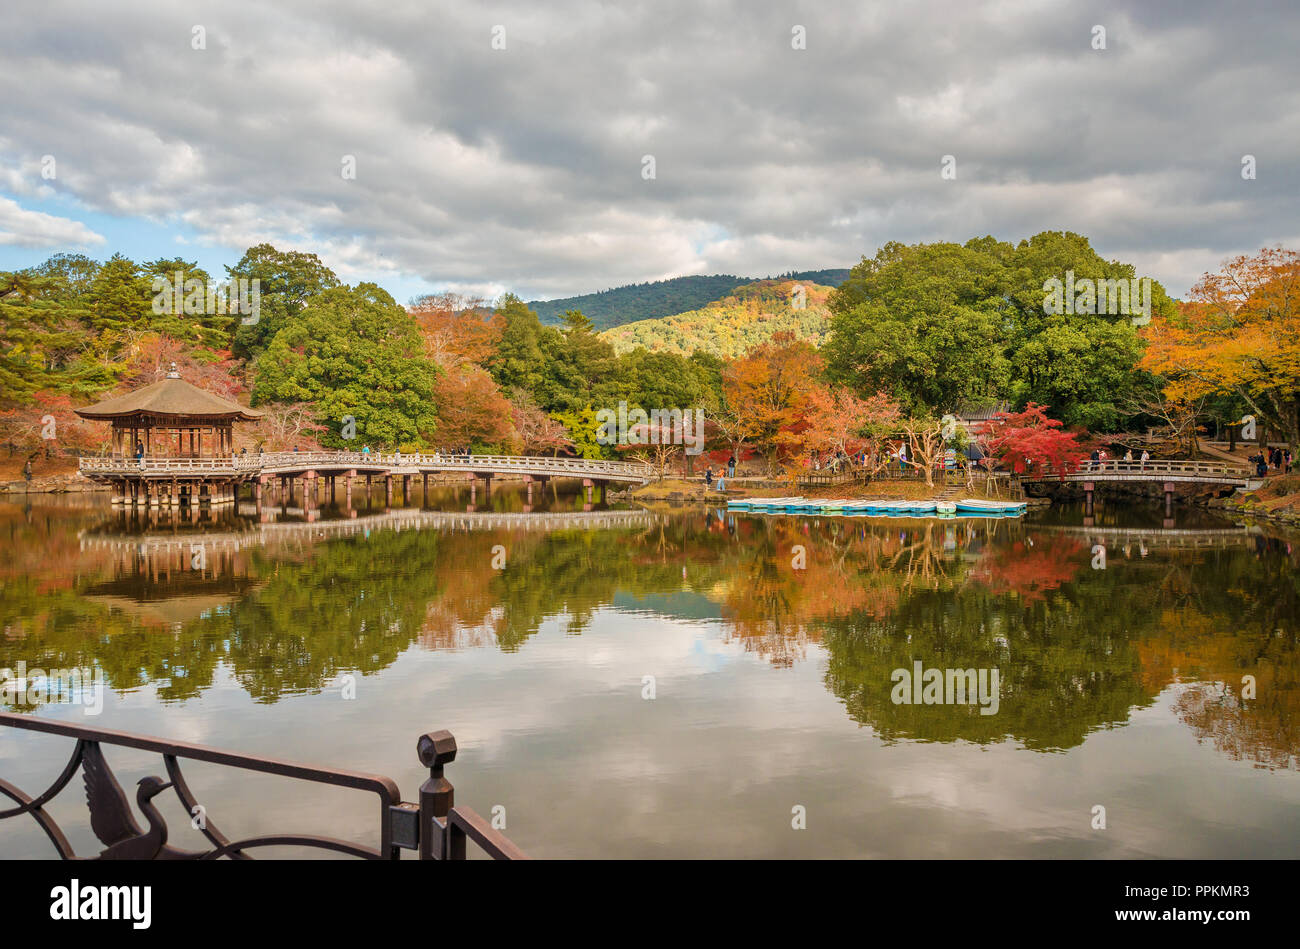 View of Nara public park in autumn, with pond and old pavilion Stock Photo